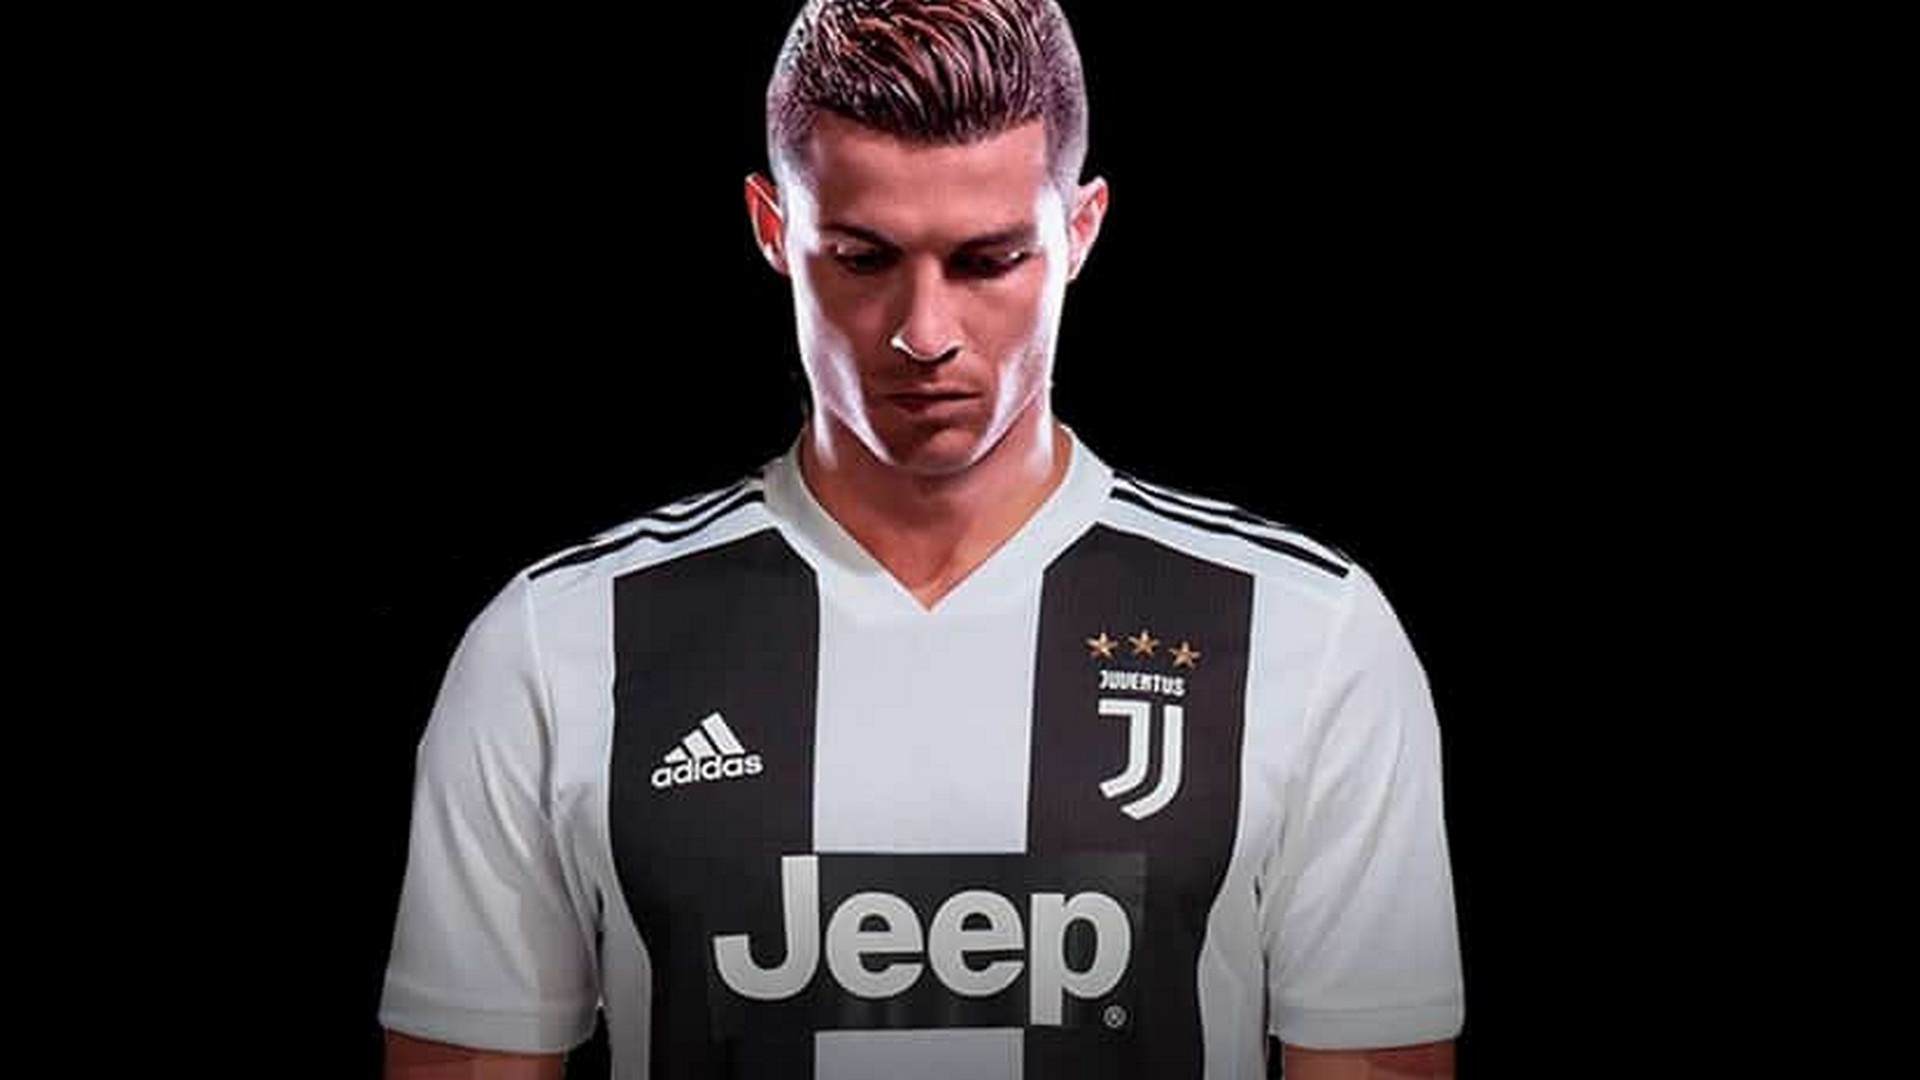 CR7 Juventus Wallpaper For Desktop with resolution 1920X1080 pixel. You can use this wallpaper as background for your desktop Computer Screensavers, Android or iPhone smartphones